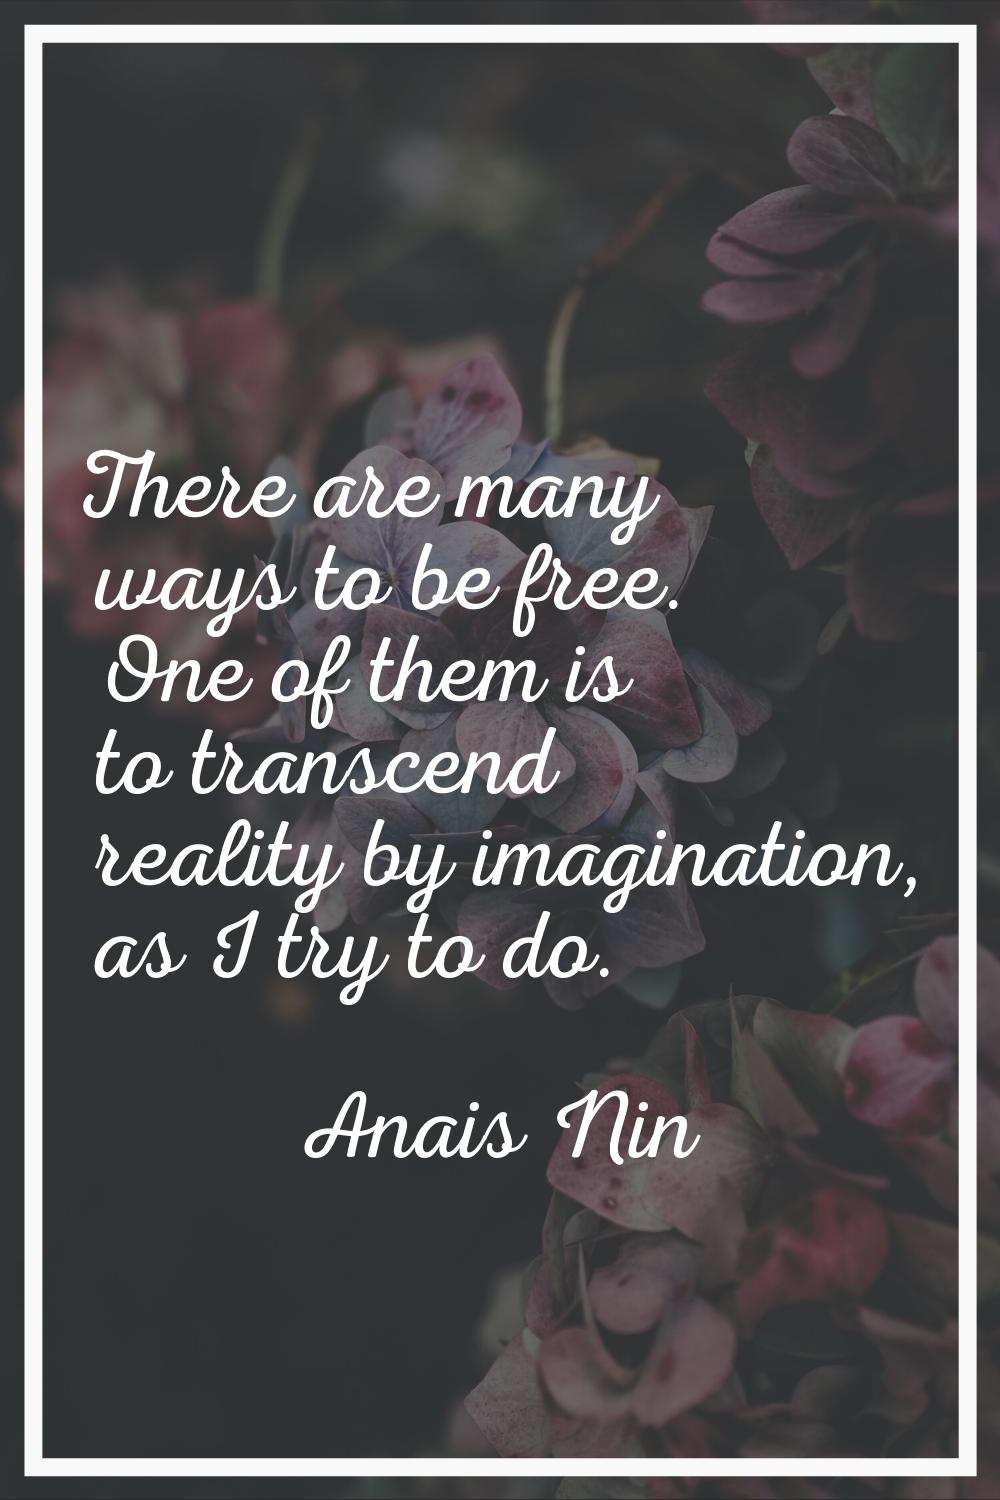 There are many ways to be free. One of them is to transcend reality by imagination, as I try to do.